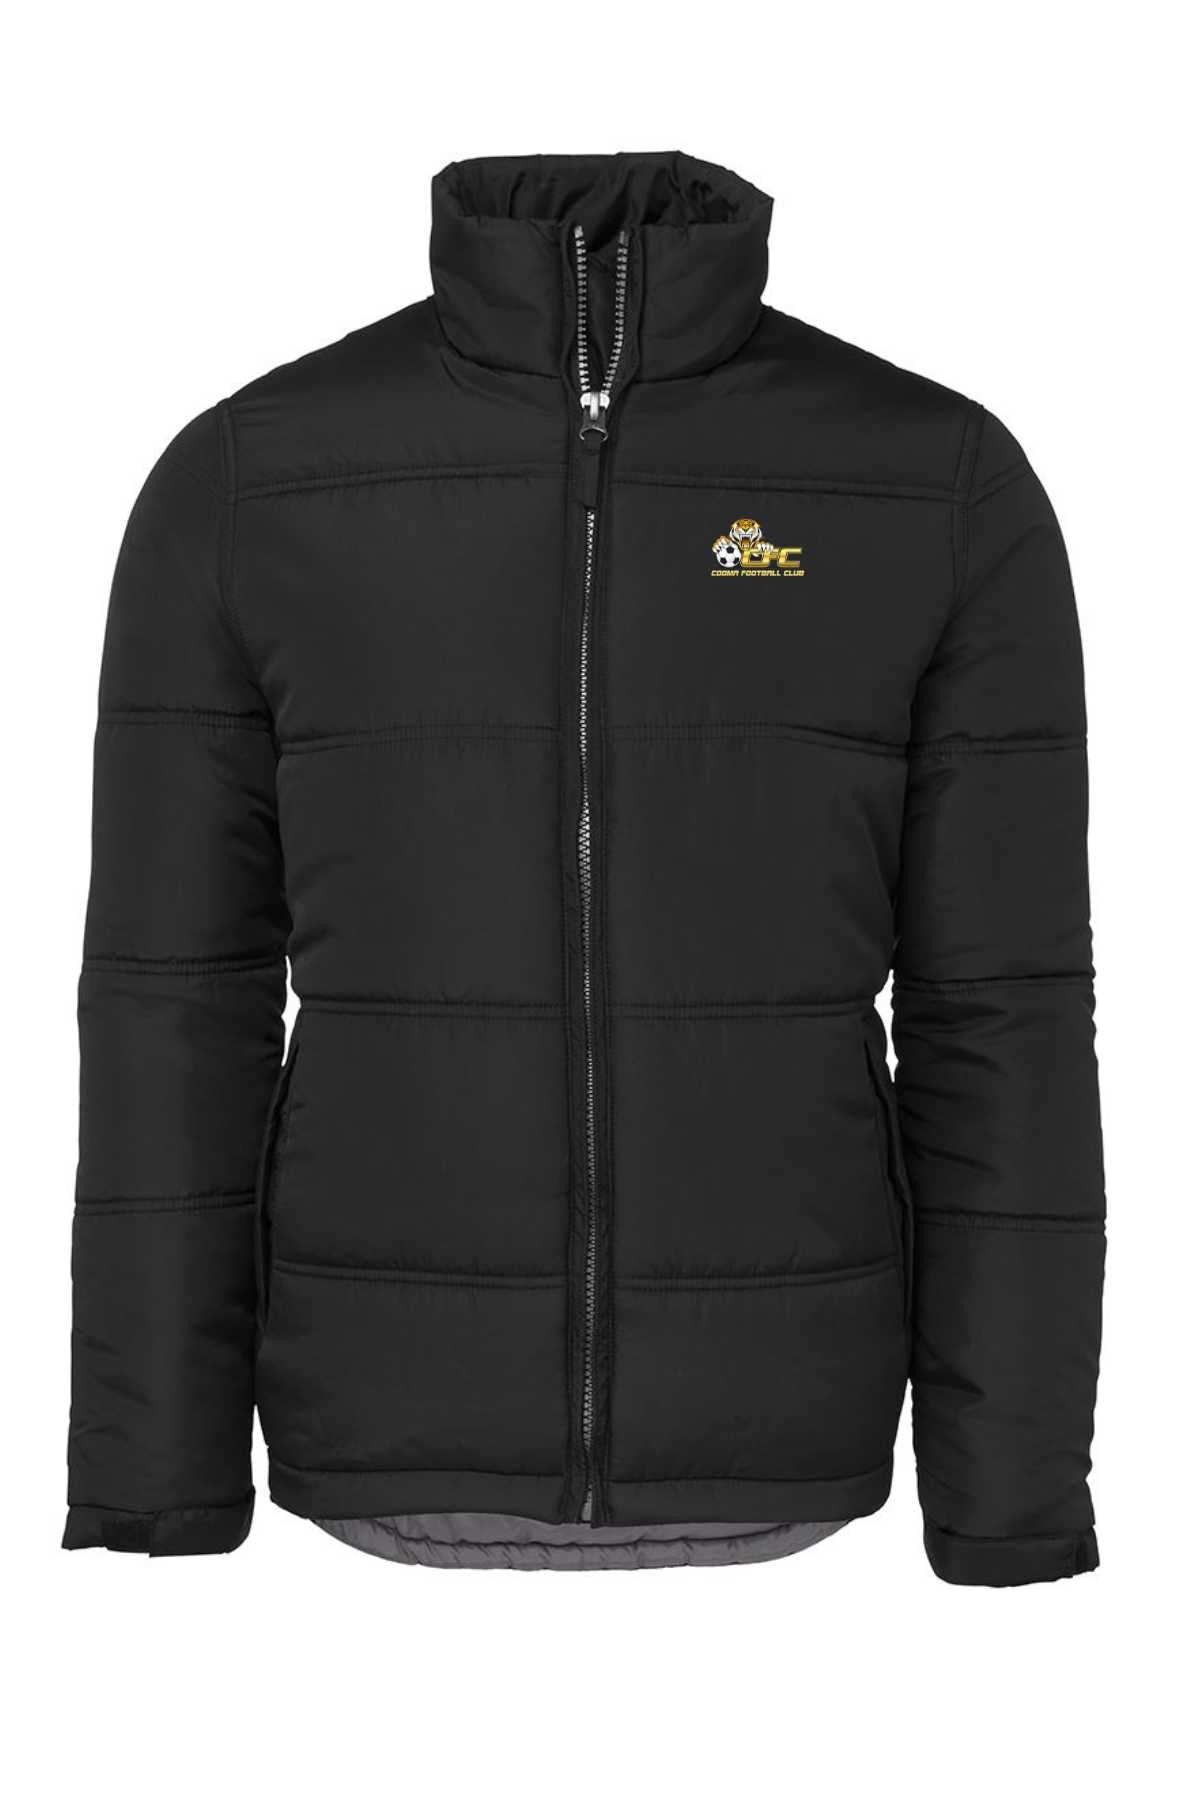 Cooma Football Club Puffer Jacket